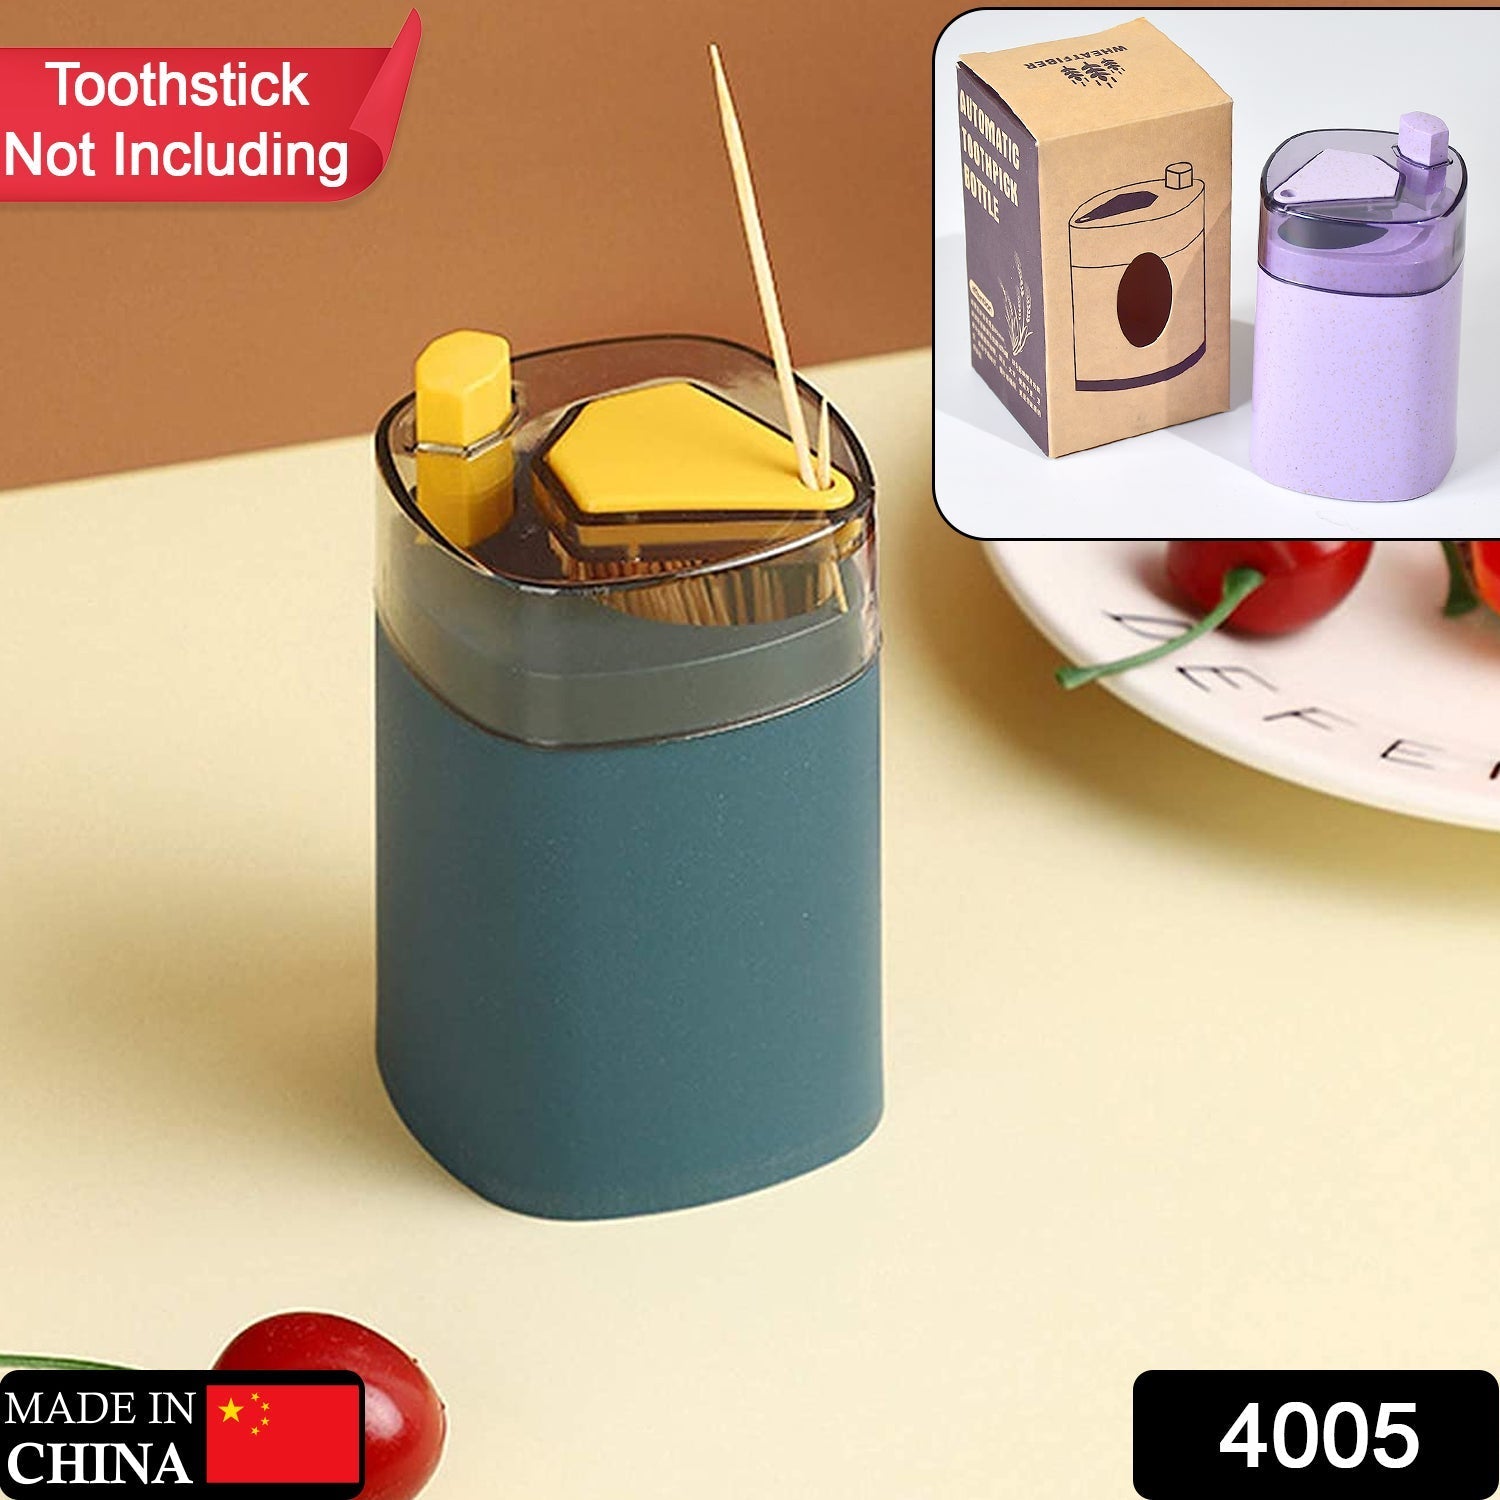 4005 Toothpick Holder Dispenser, Pop-Up Automatic Toothpick Dispenser for Kitchen Restaurant Thickening Toothpicks Container Pocket Novelty, Safe Container Toothpick Storage Box. DeoDap